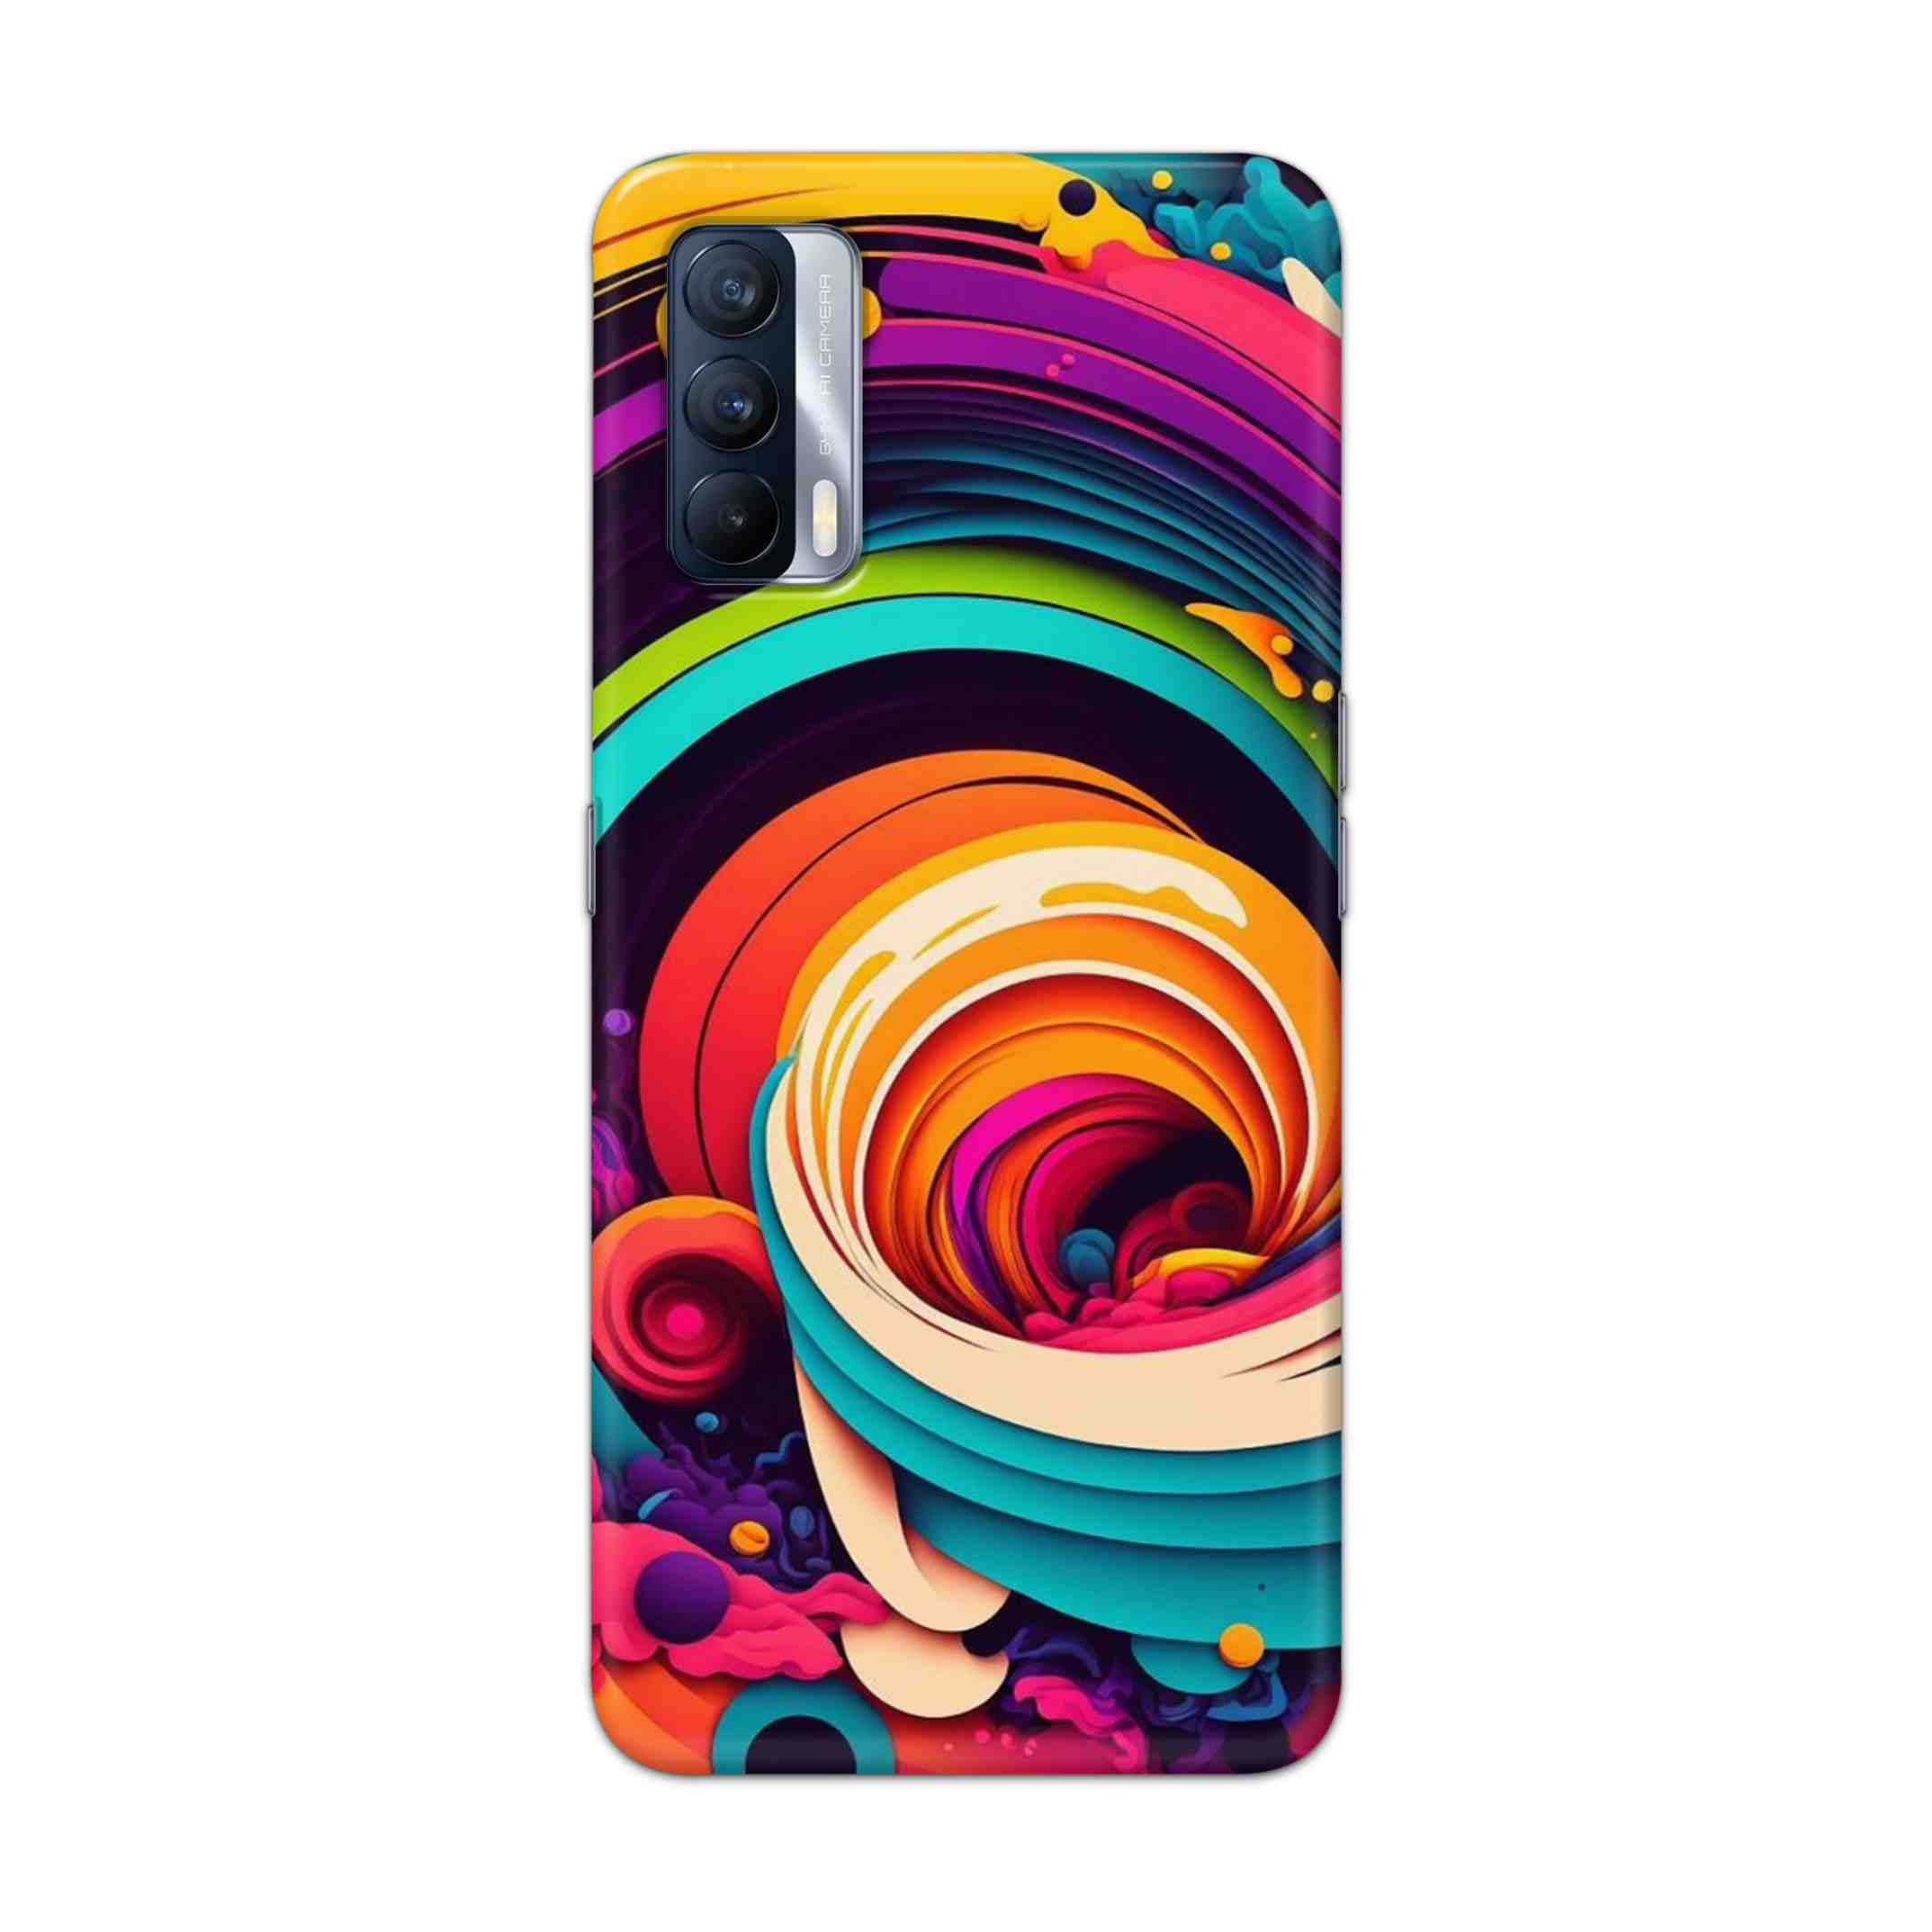 Buy Colour Circle Hard Back Mobile Phone Case Cover For Realme X7 Online